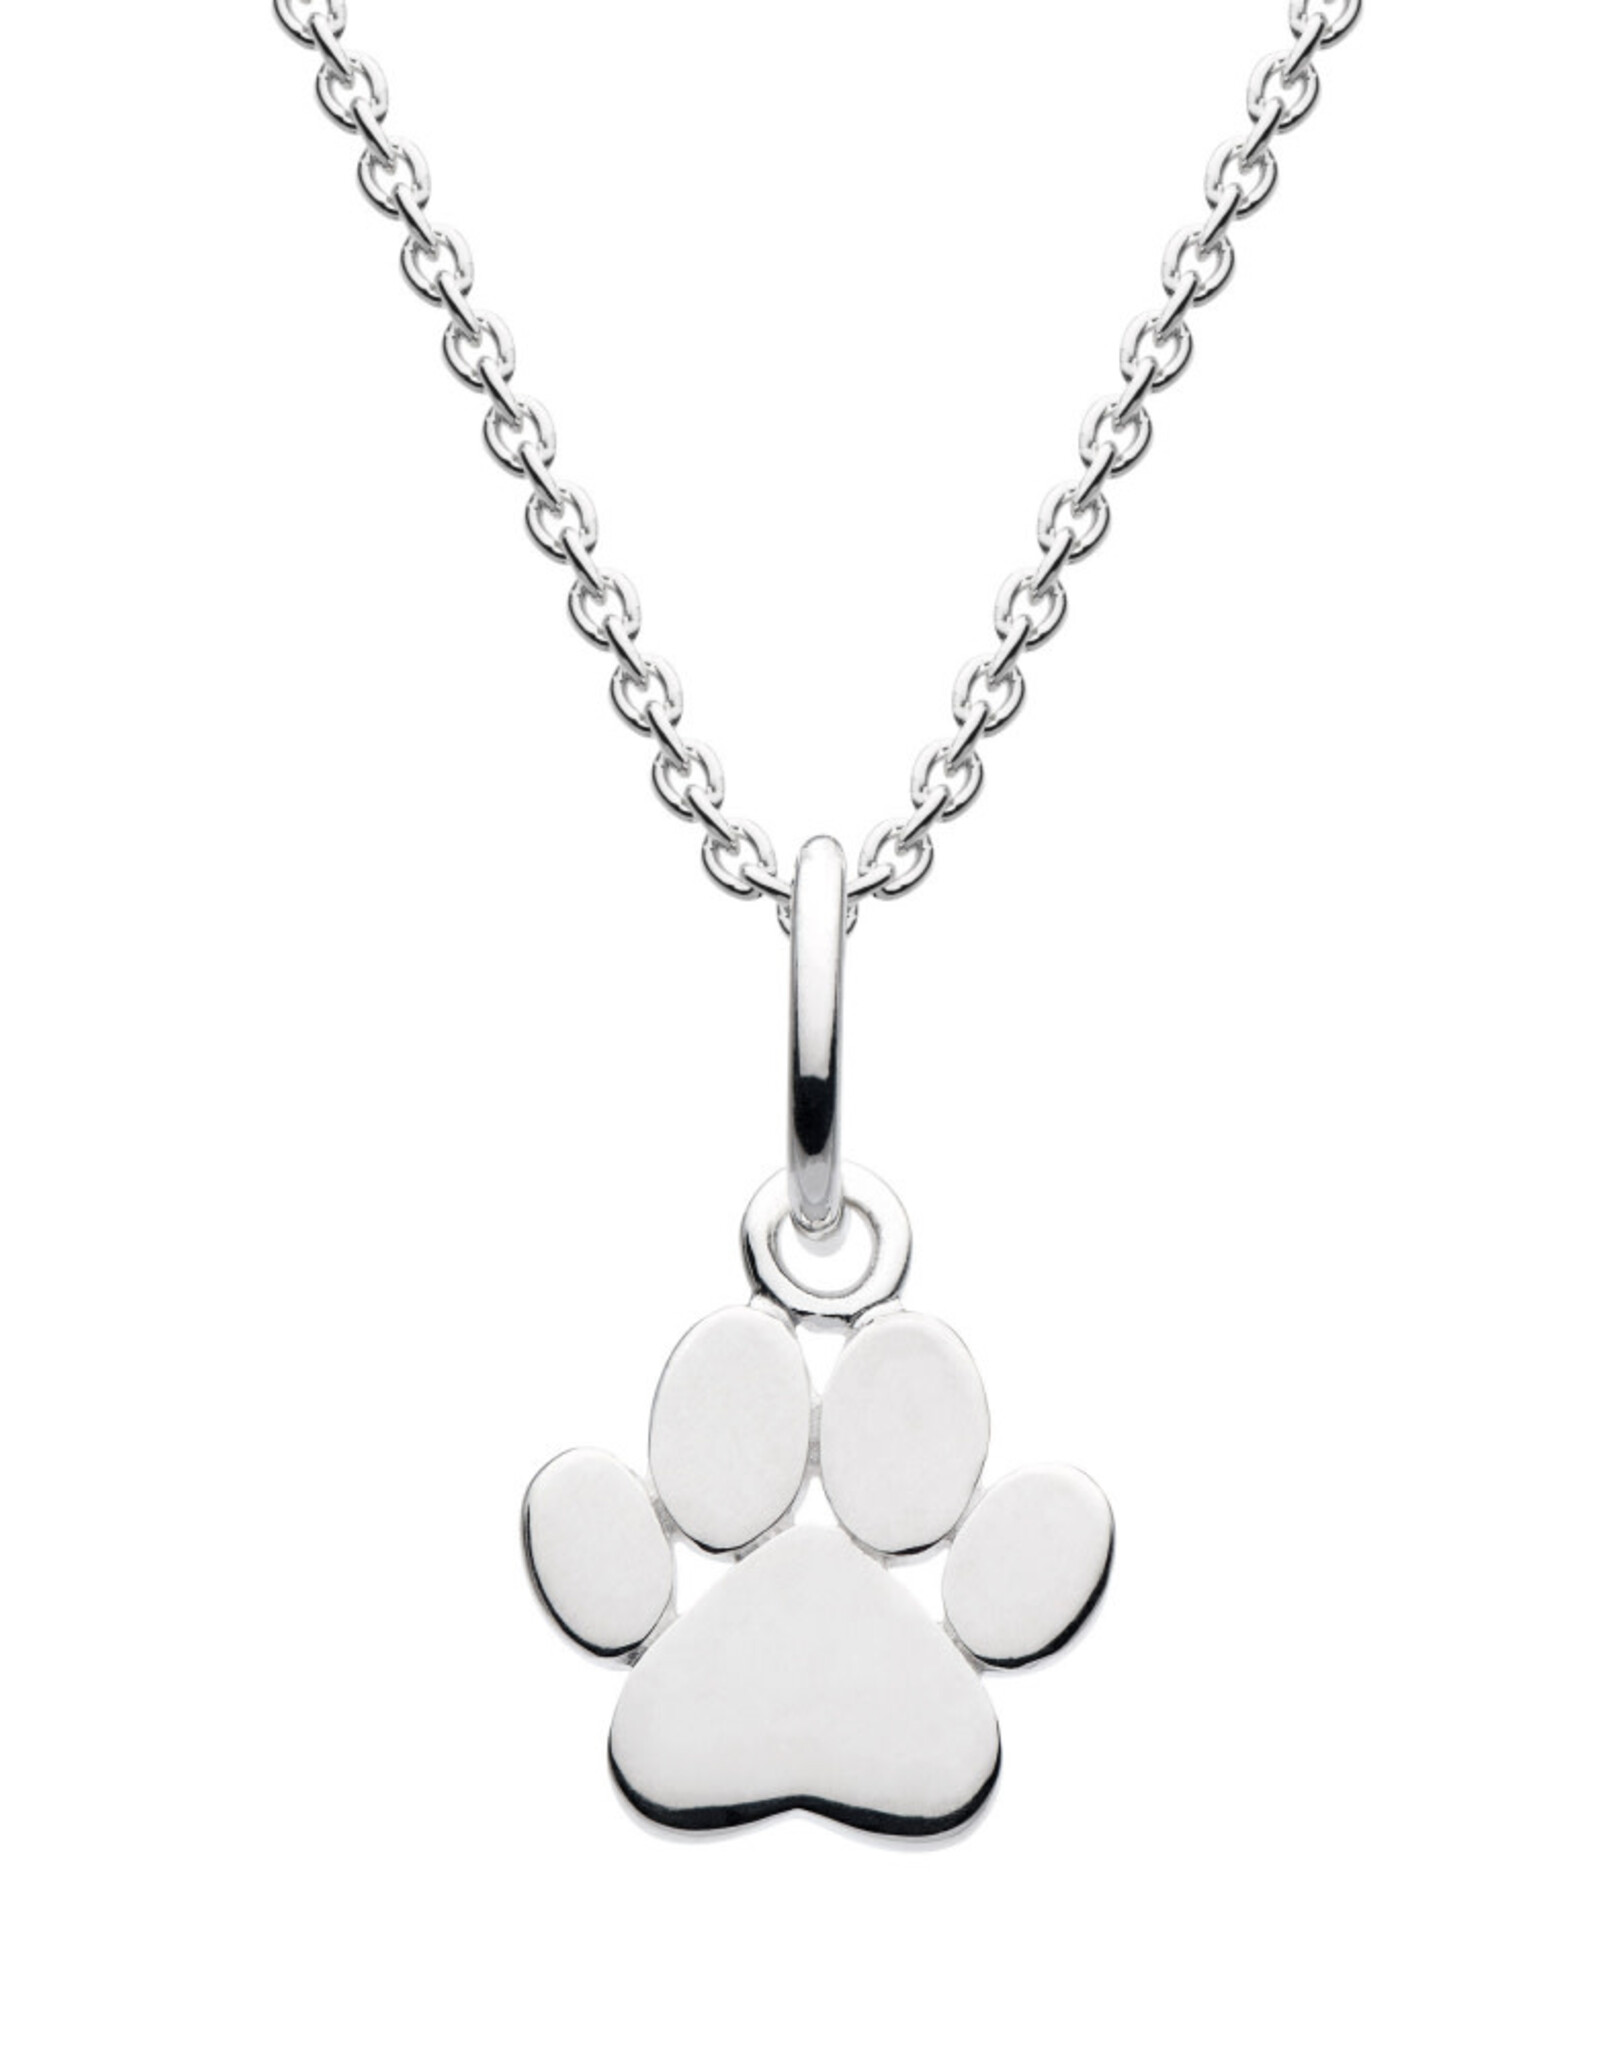 Kit Heath PAW PRINT SILHOUETTE  NECKLACE - sterling silver